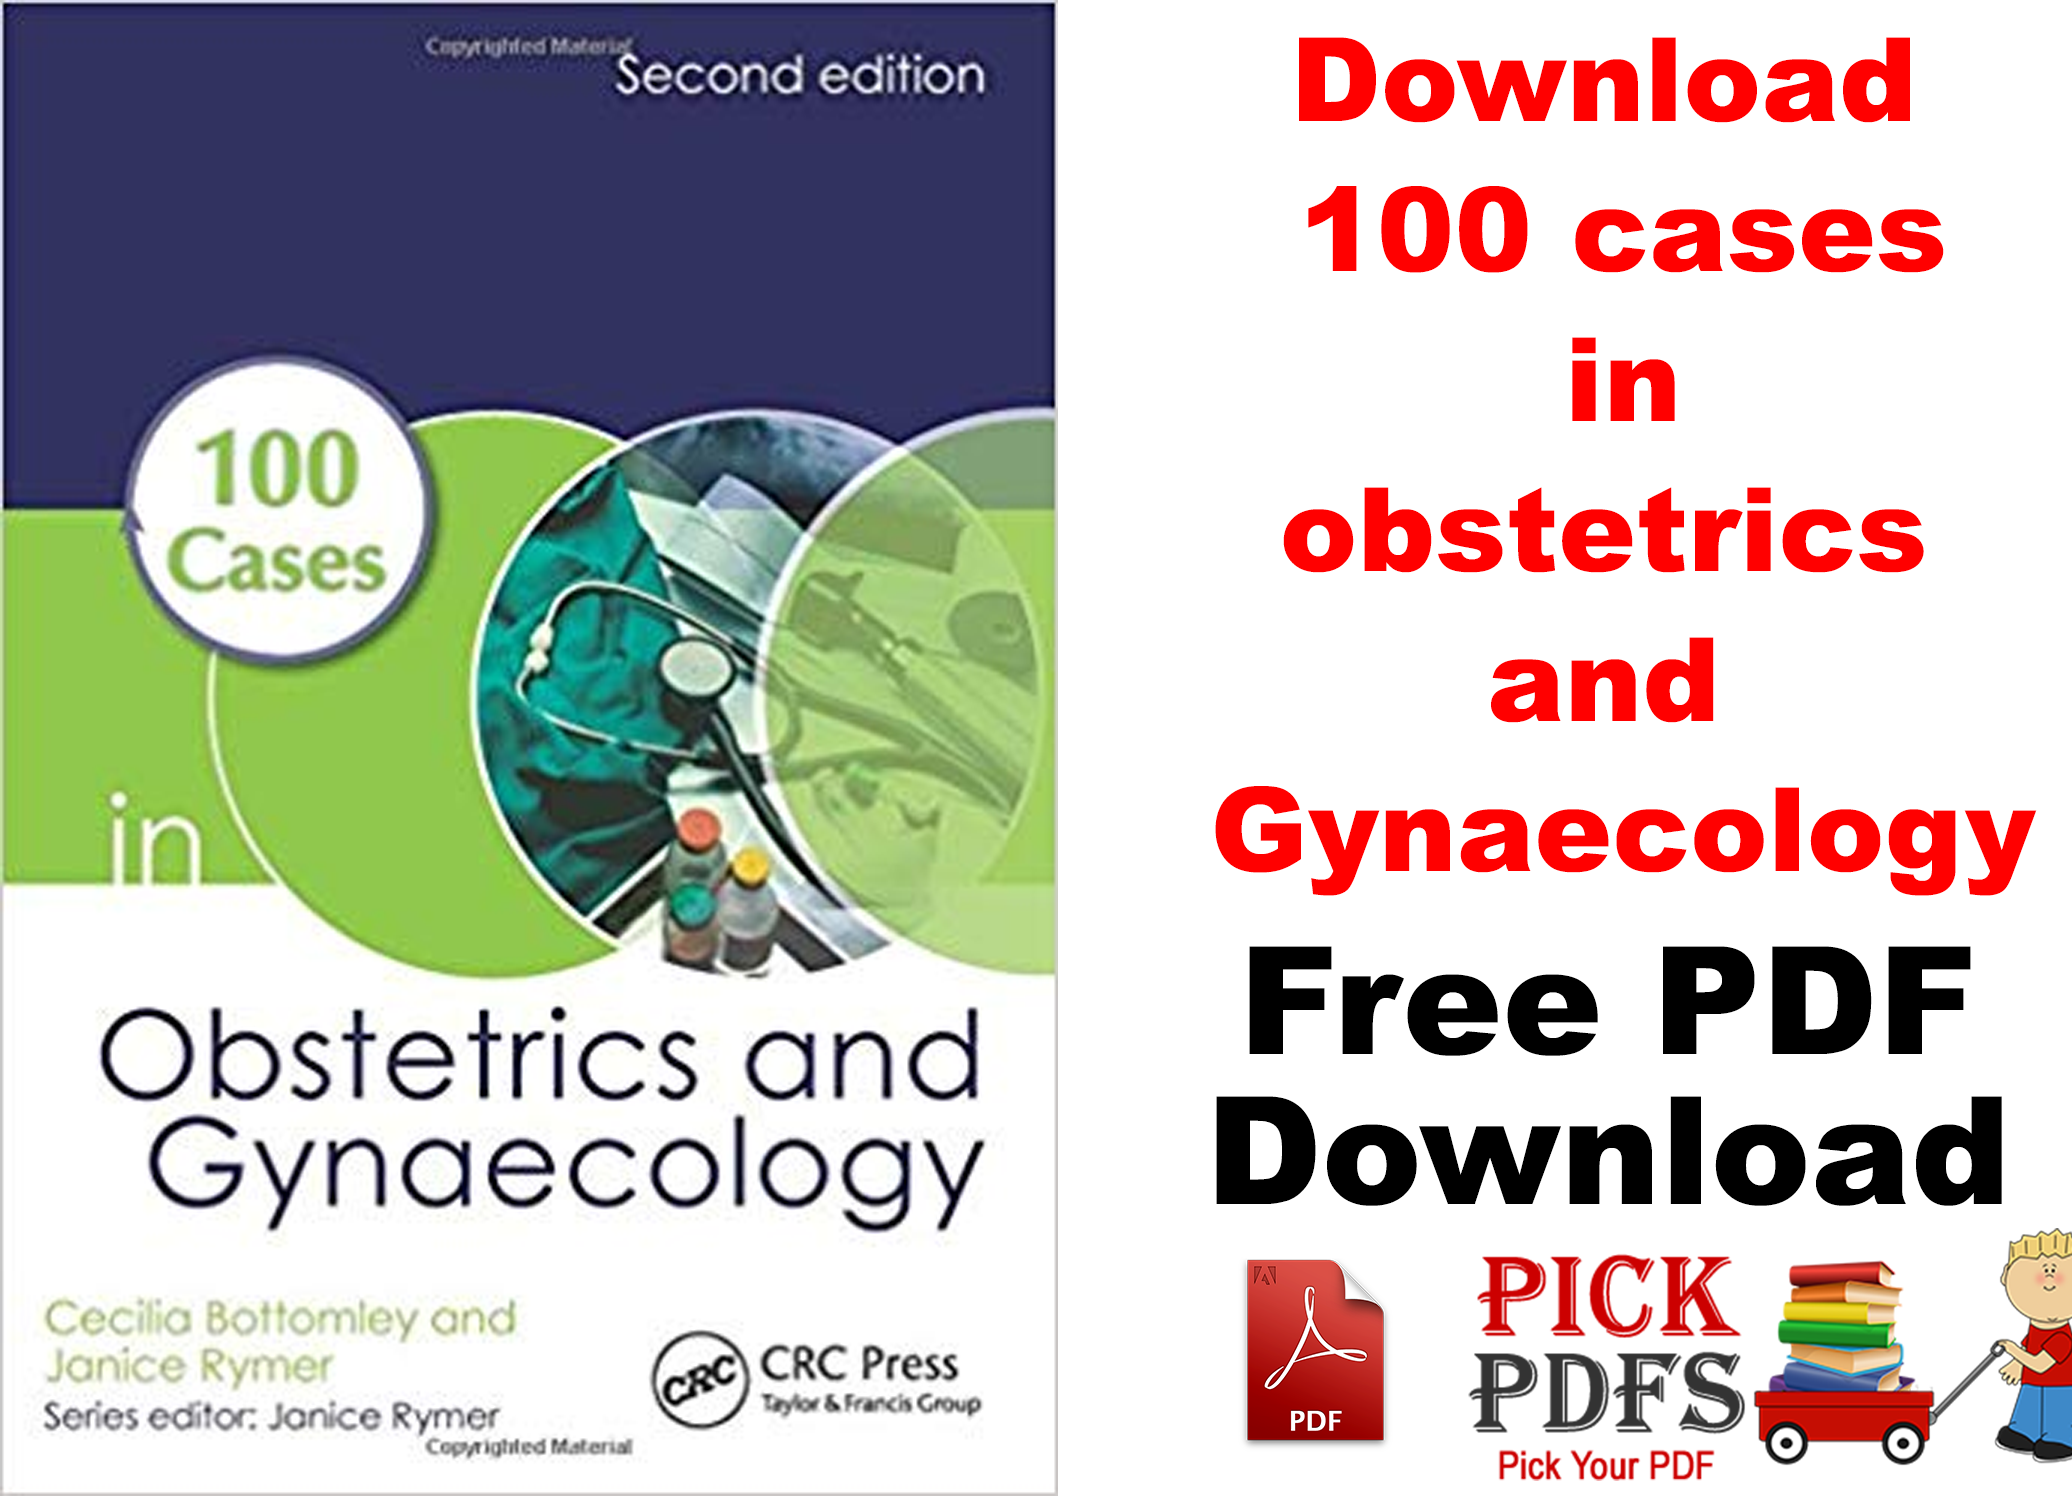 https://pickpdfs.com/download-telephone-triage-for-obstetrics-and-gynecology-3rd-edition-pdf-free/